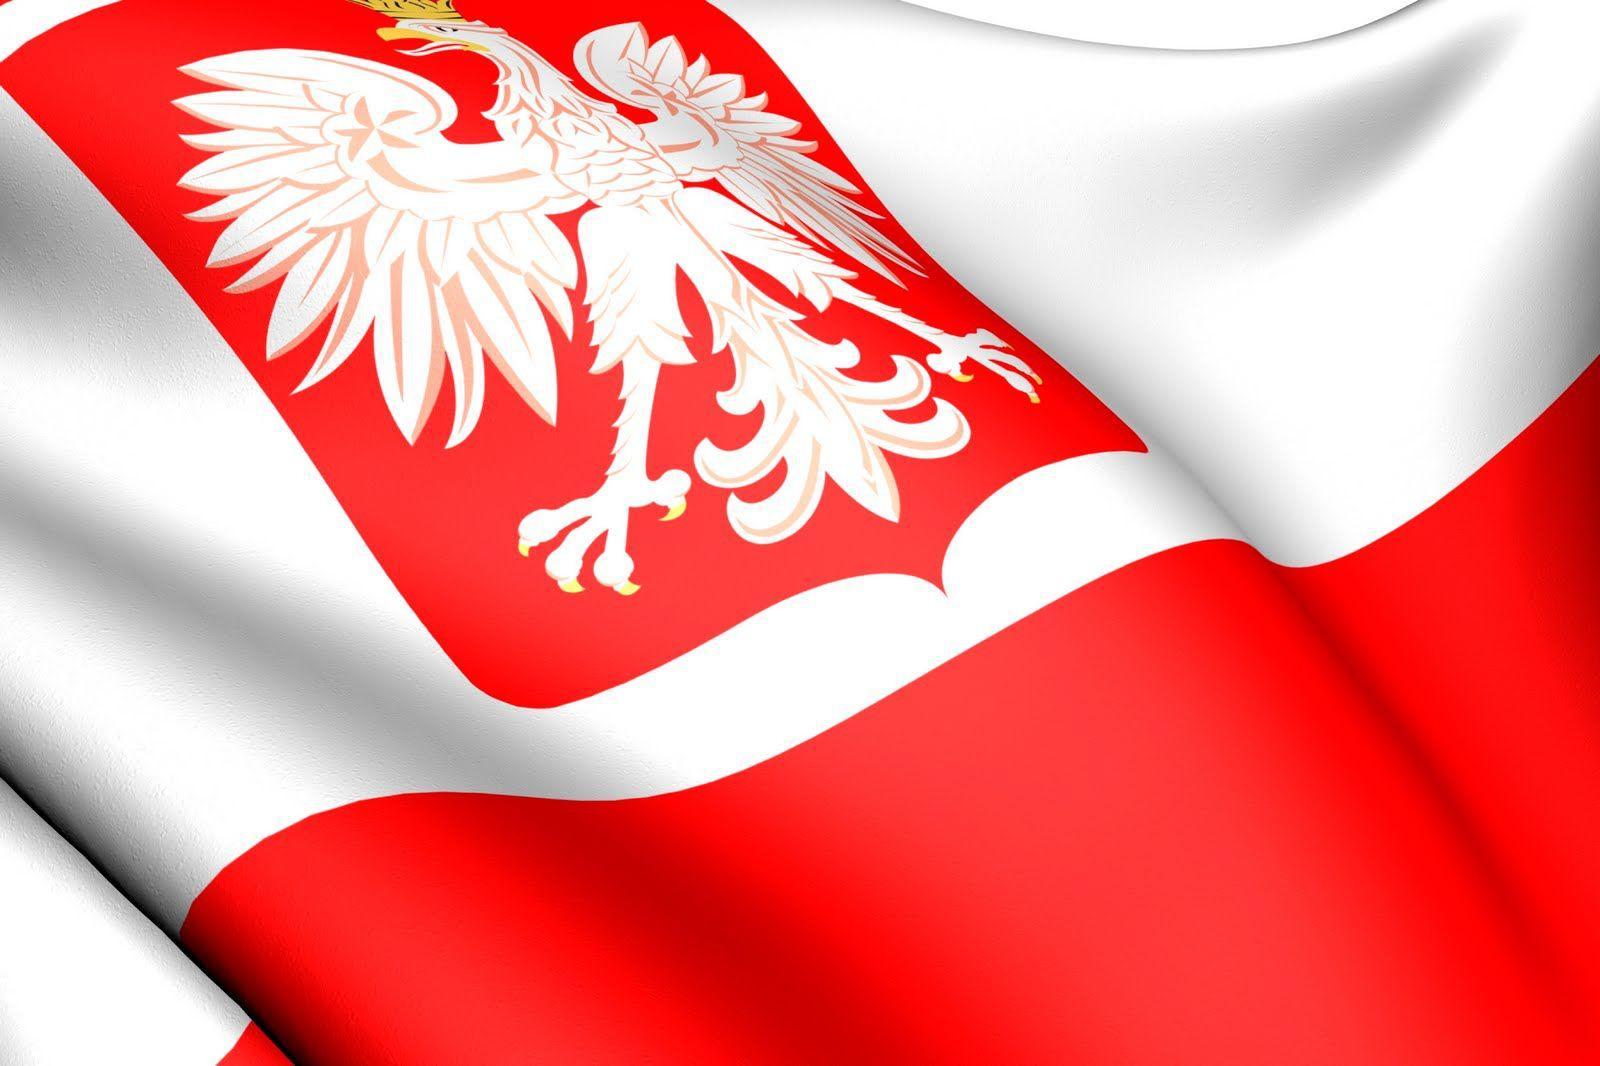 Poland Flag Wallpaper for Android